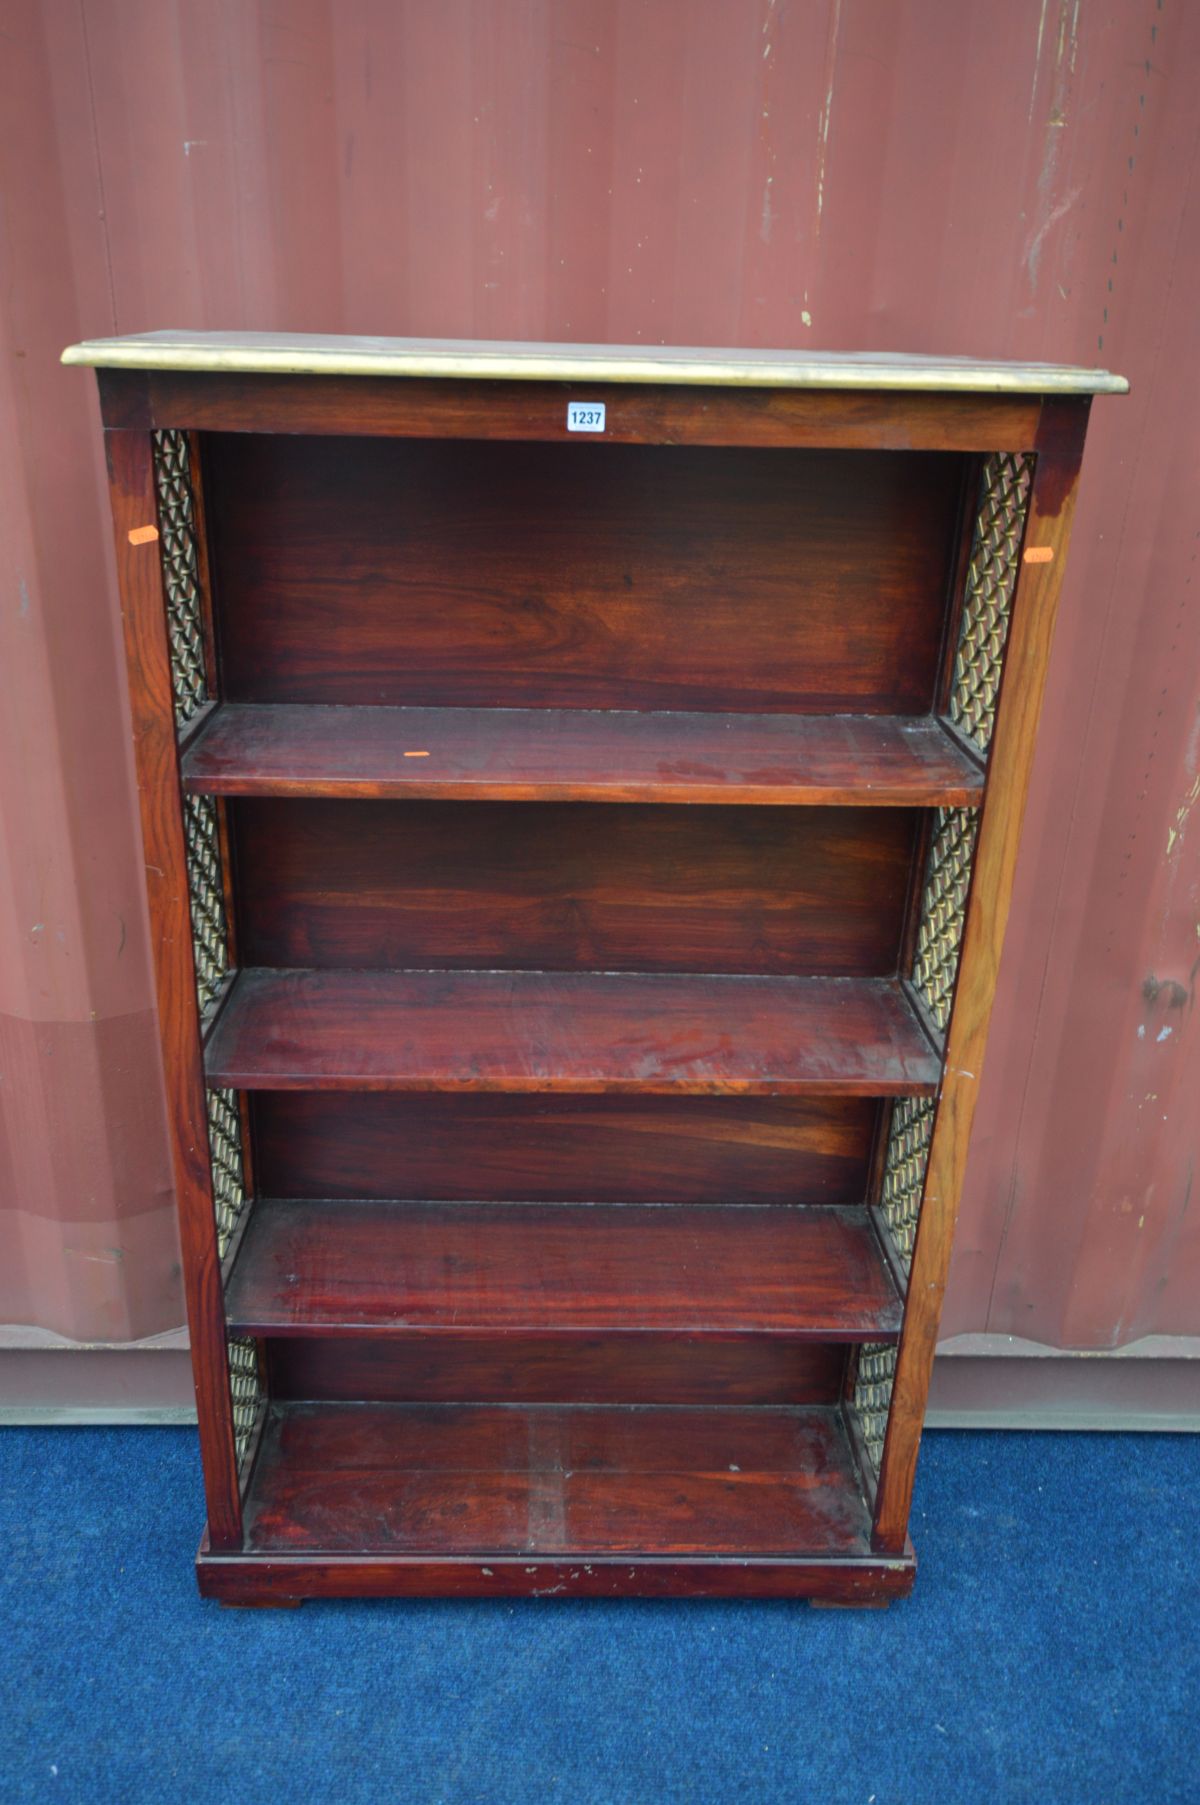 A HARDWOOD OPEN BOOKCASE with iron sides, width 90cm x depth 30cm x height 150cm (the item in this